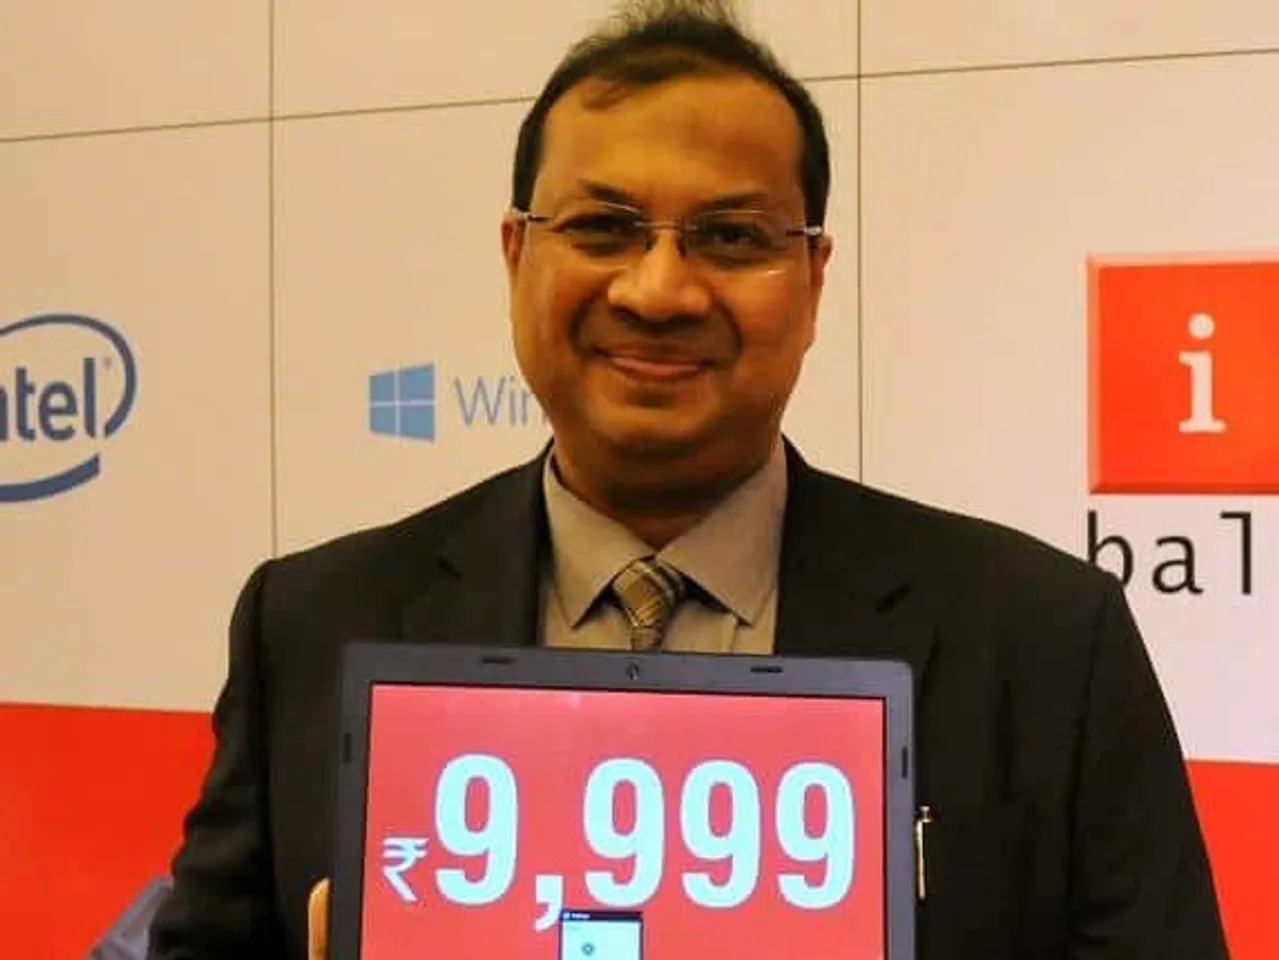 iBall launches Windows 10 laptop for Rs.9,999 in India